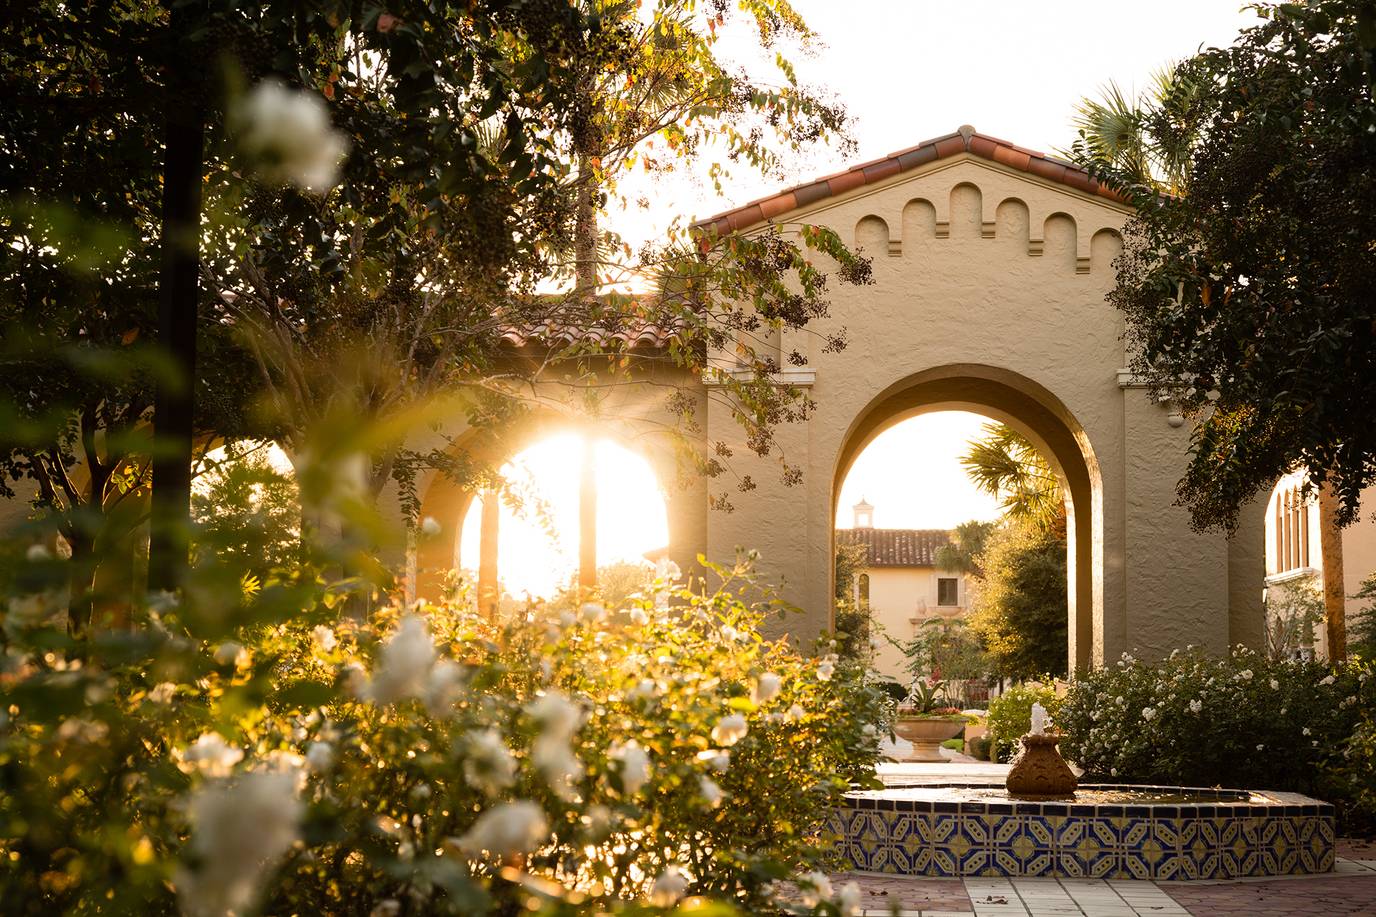 One of the many archways and courtyards on the Rollins College campus.